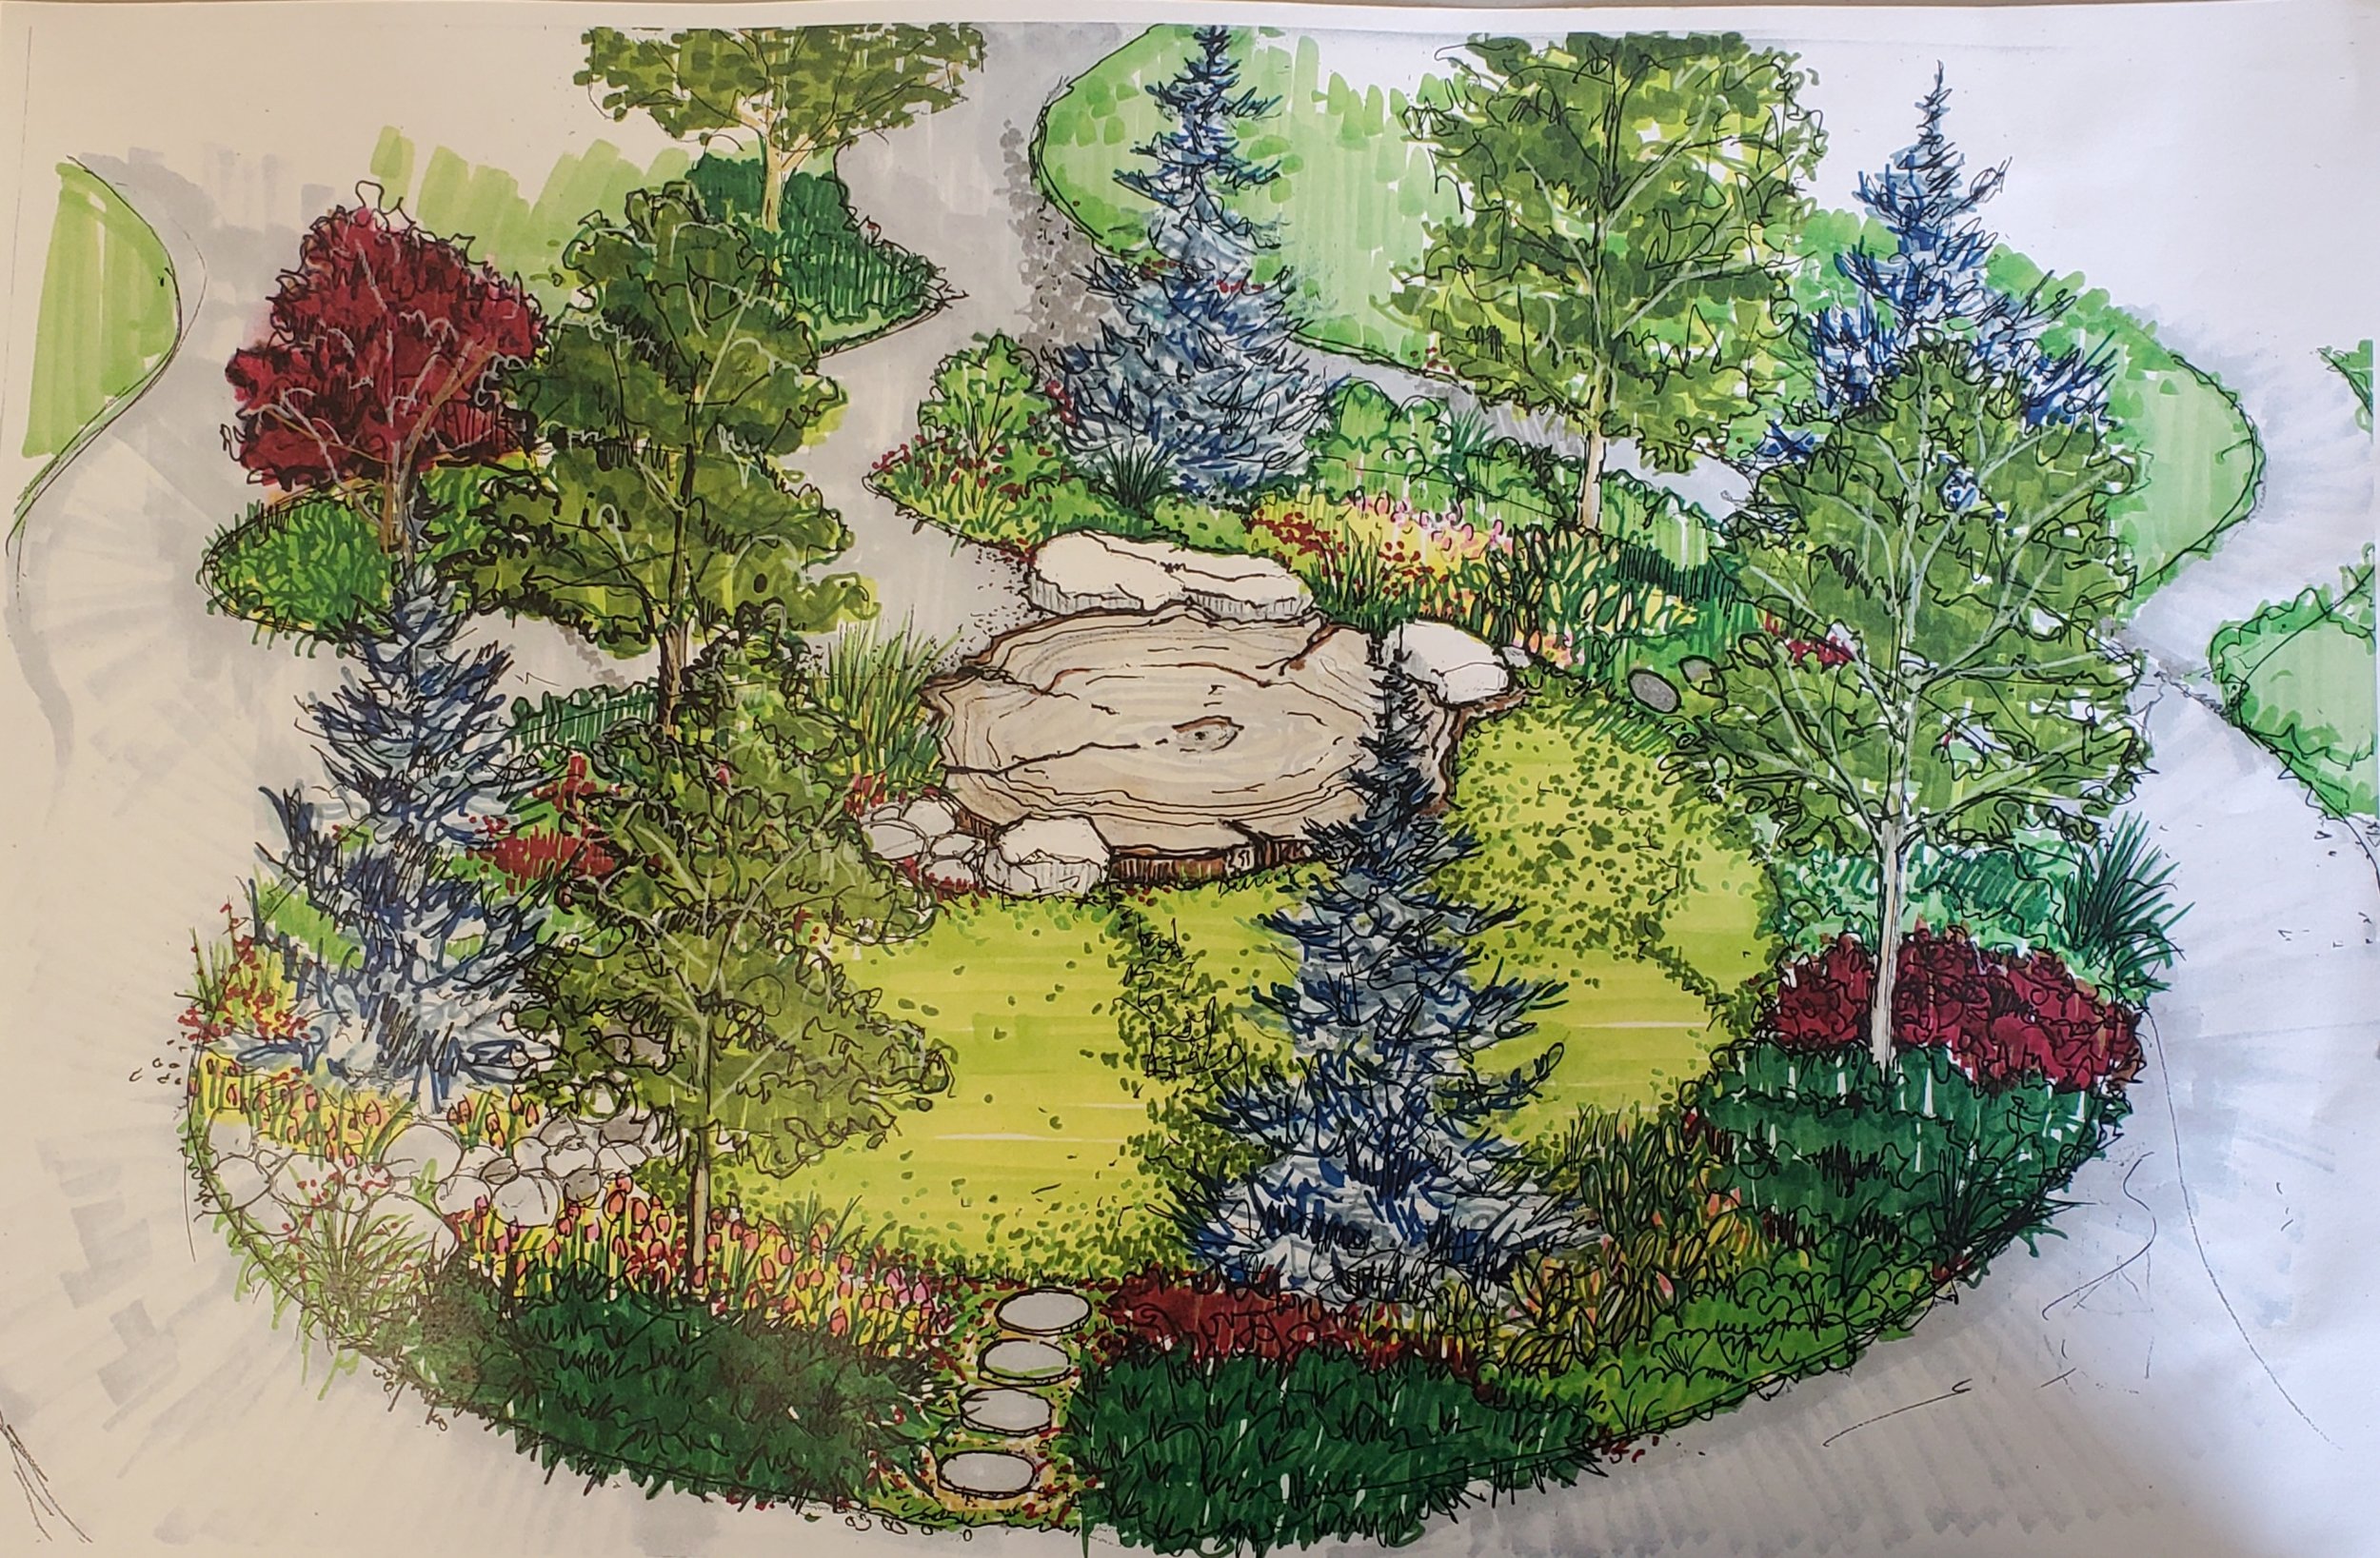  Rendering of our garden plan, showing a new Tree Ring Patio with rock benches and examples of how plantings may look. 